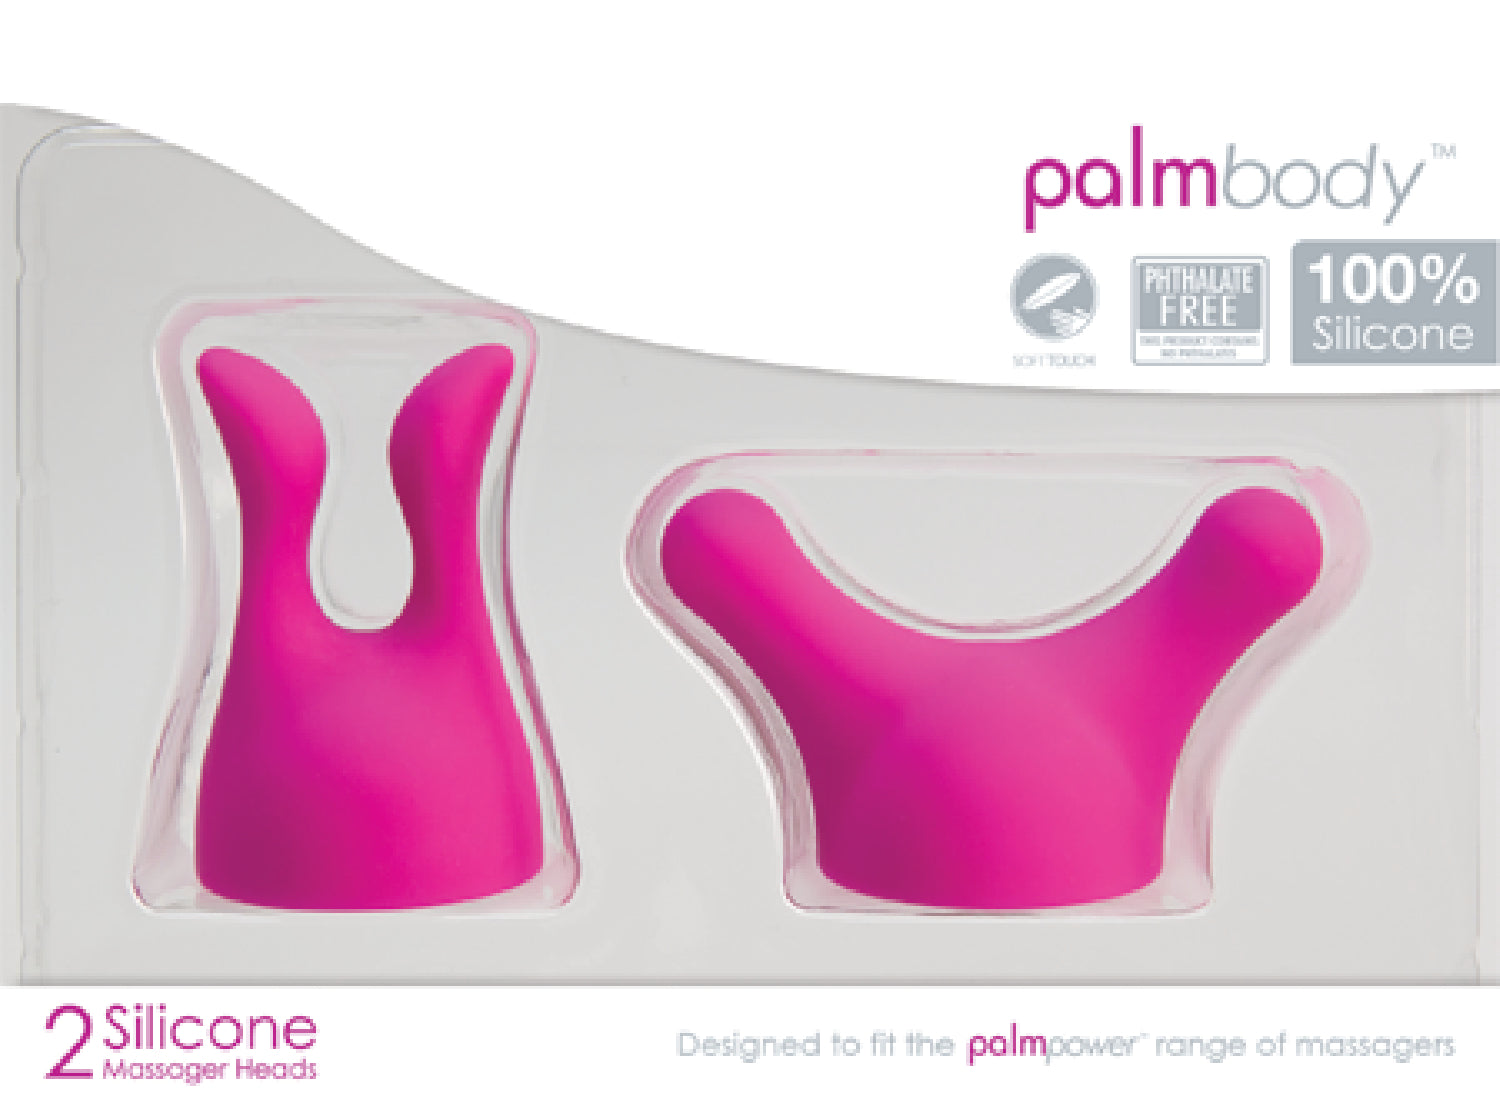 PalmBody Massager Heads - Pink (For use with PalmPower)